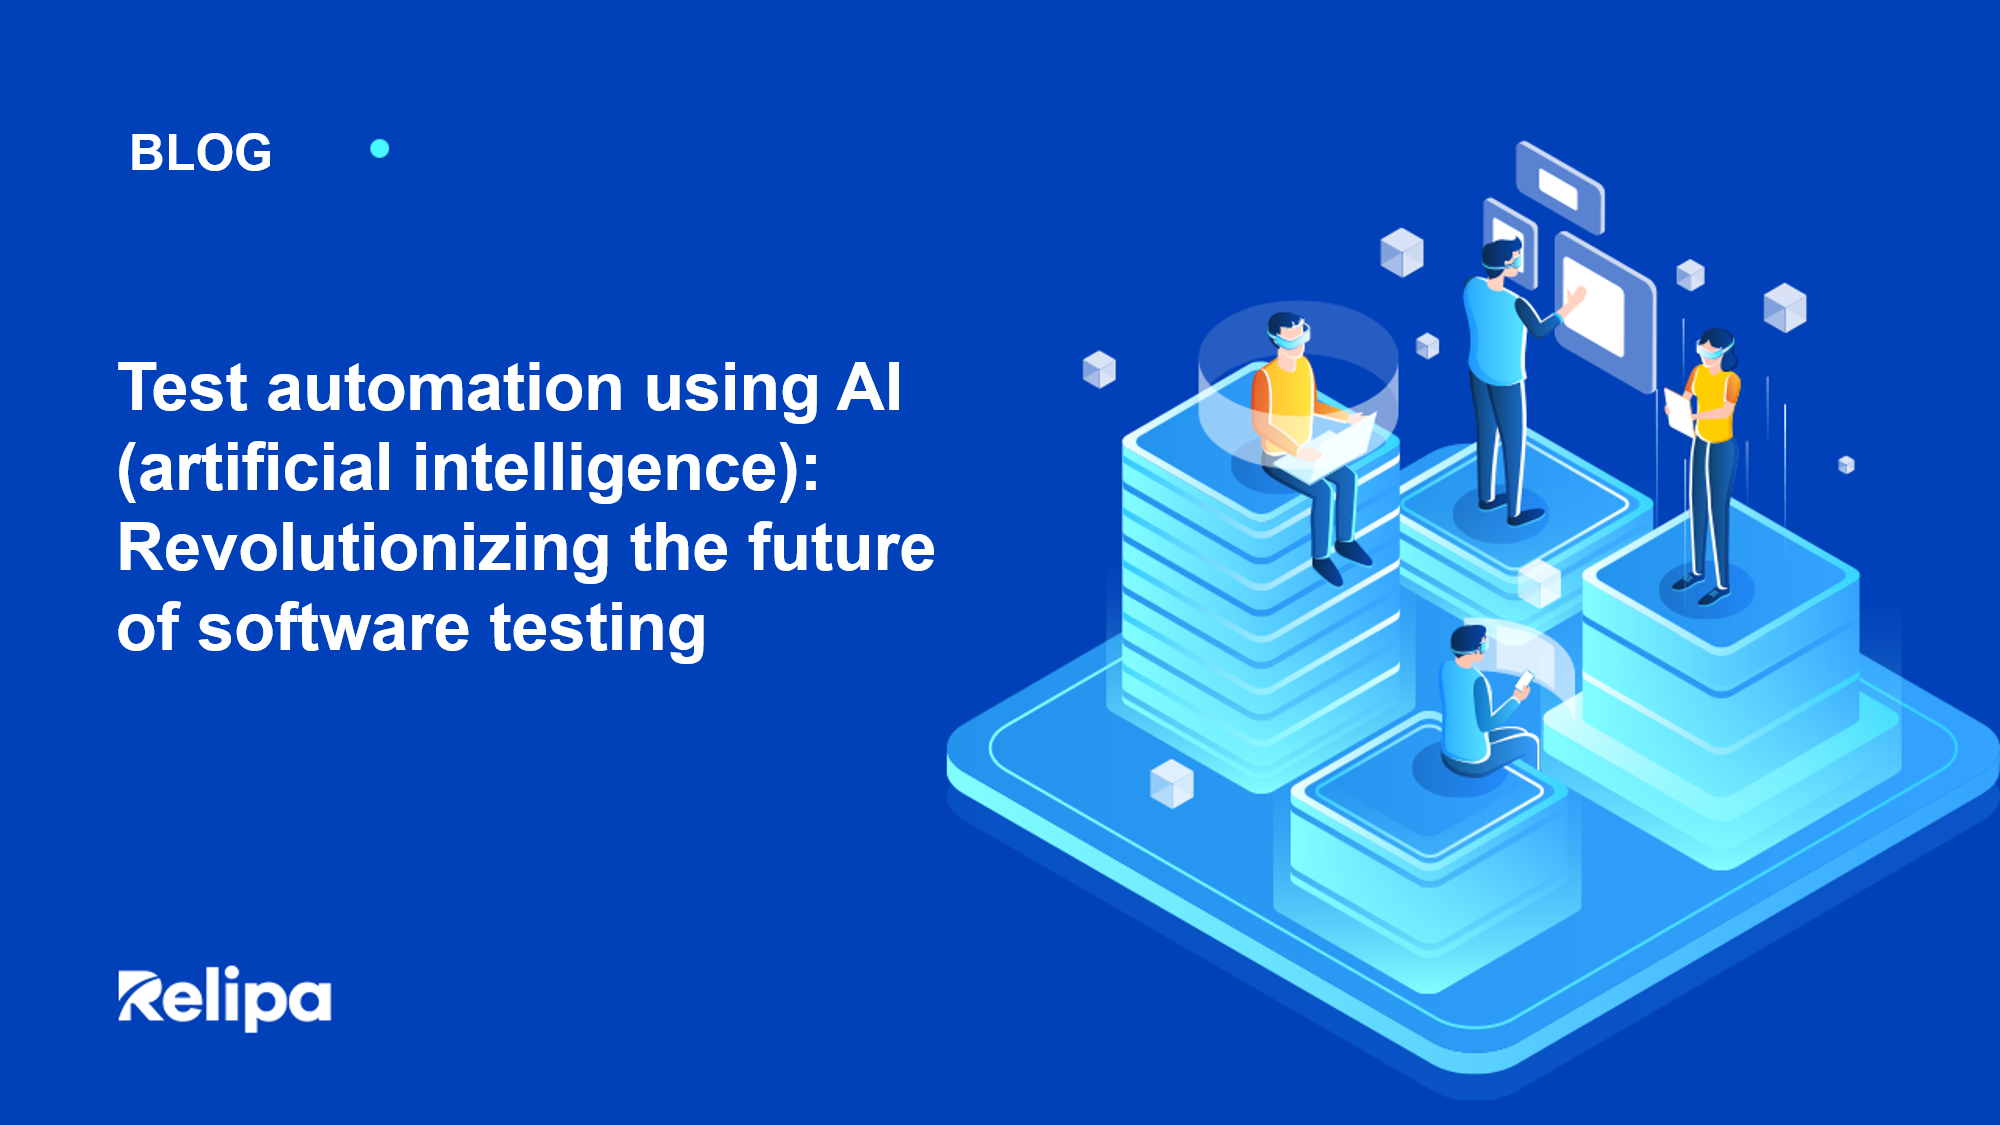 Test automation using AI (artificial intelligence): Revolutionizing the future of software testing